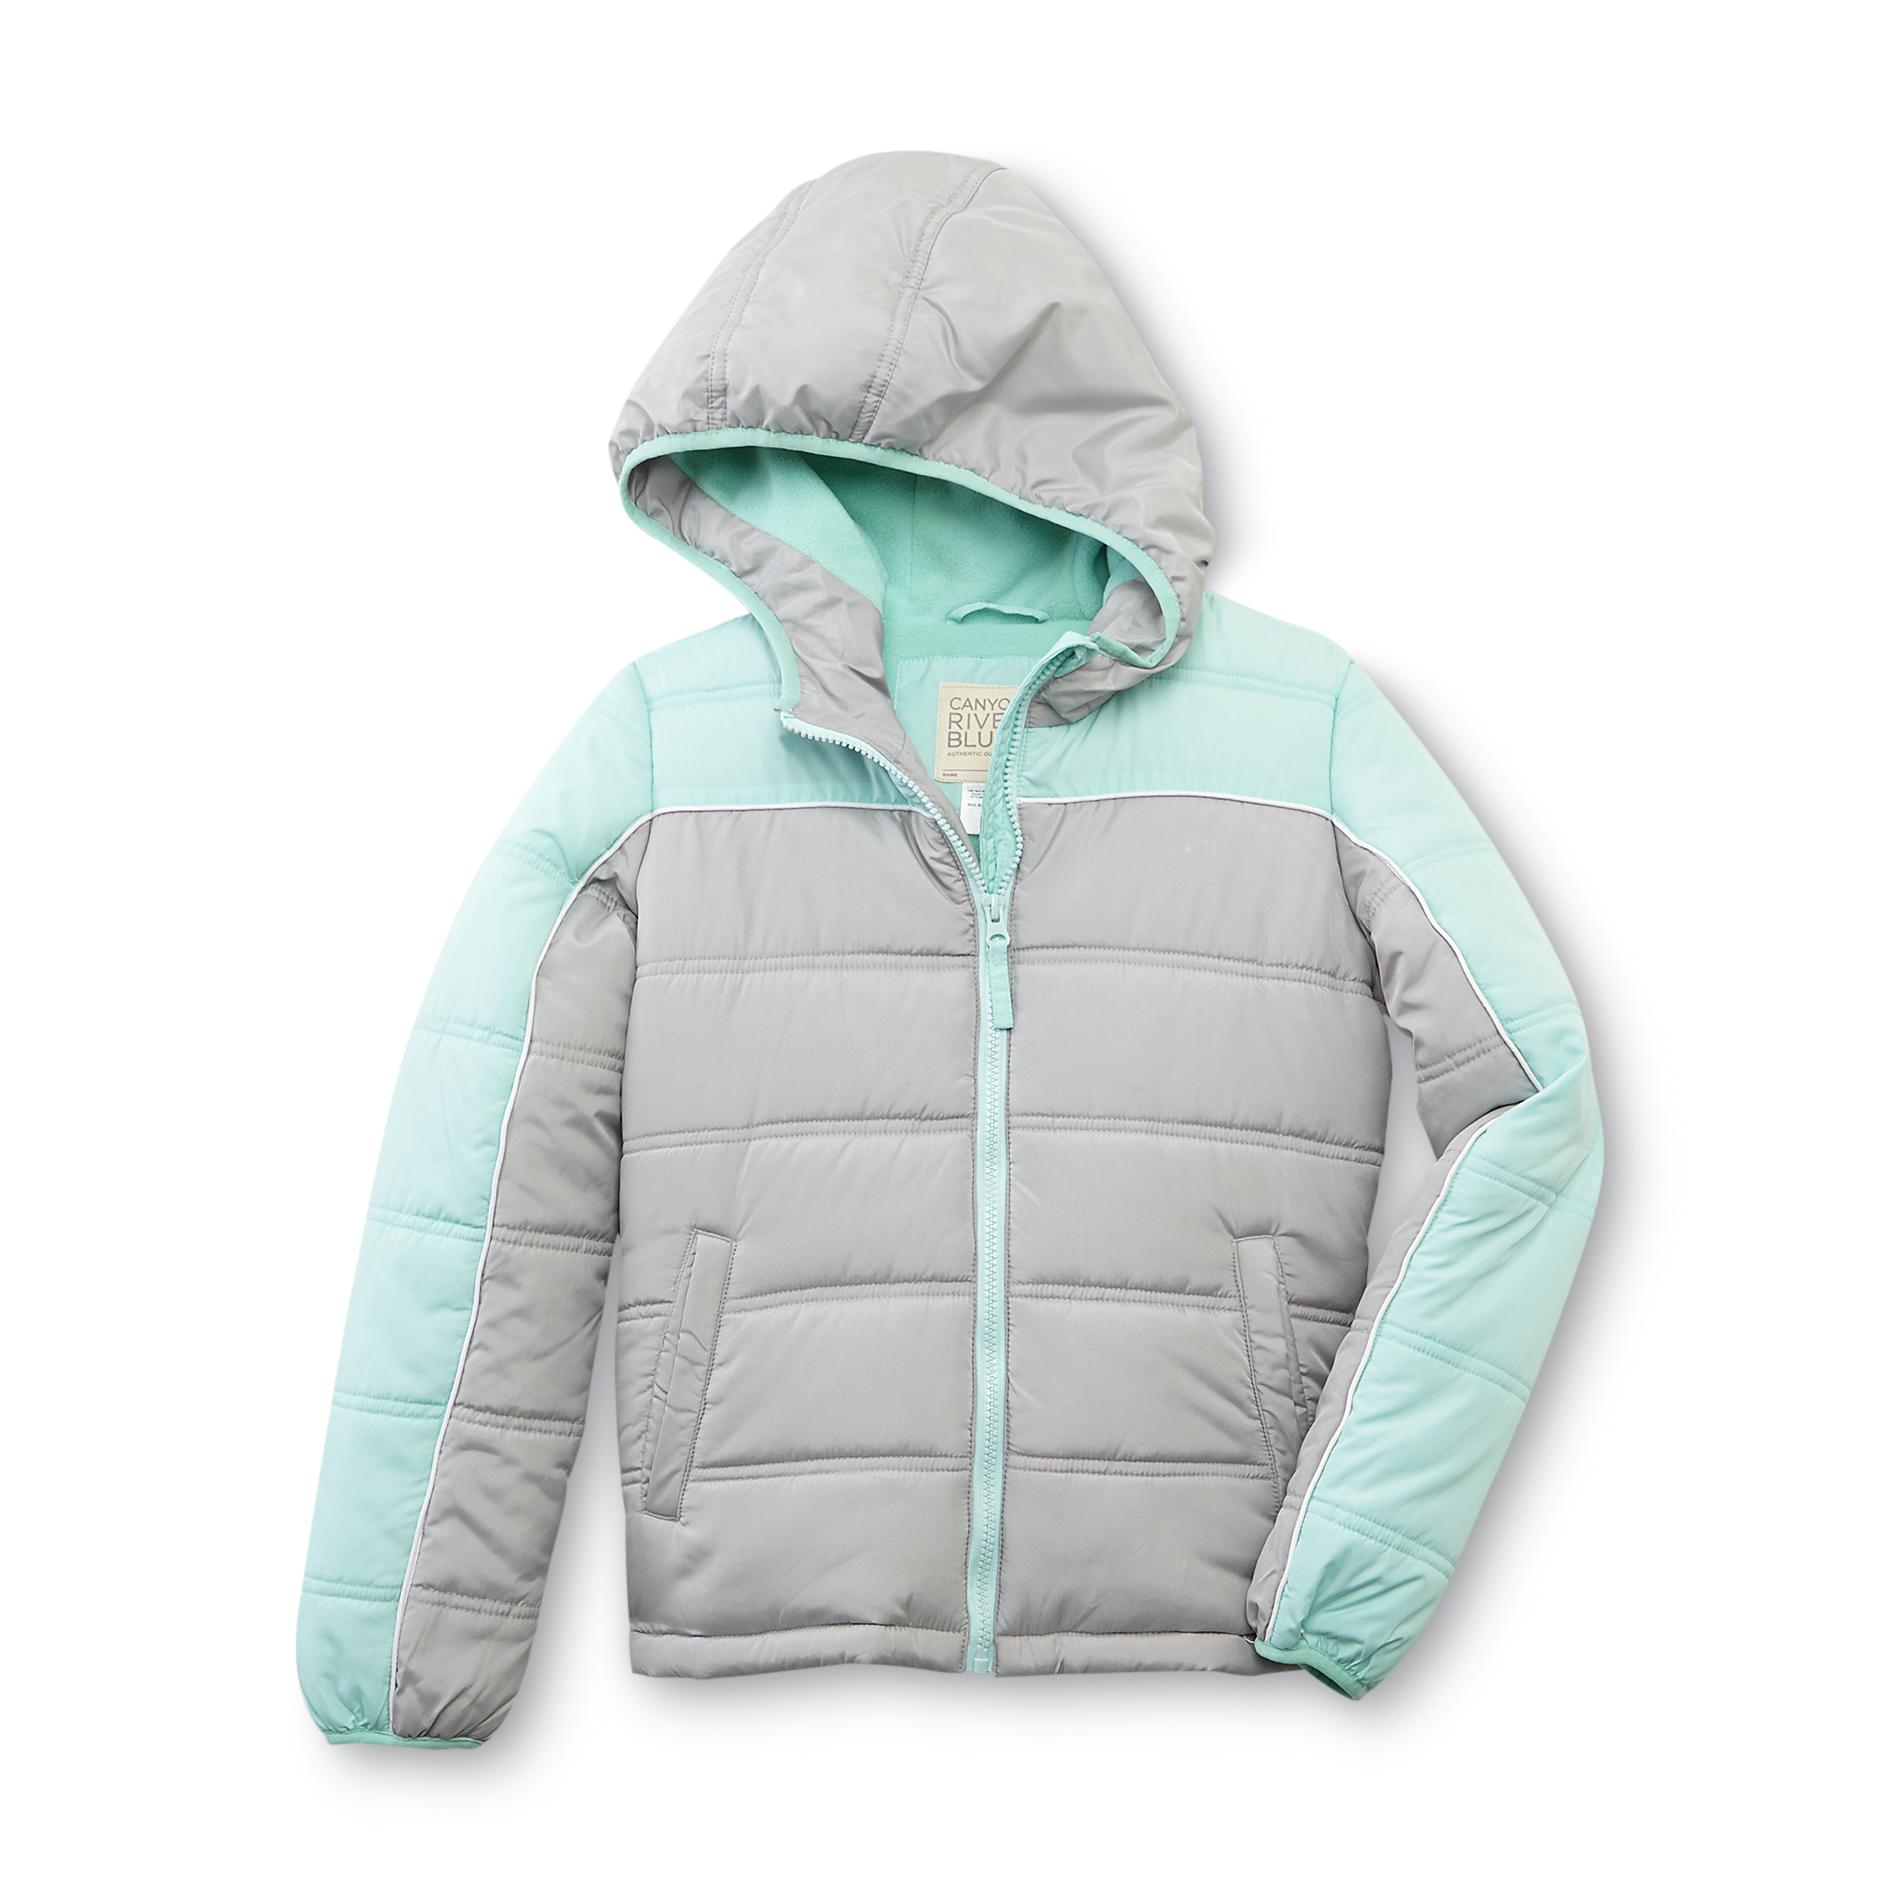 Canyon River Blues Girl's Hooded Puffer Jacket - Colorblock